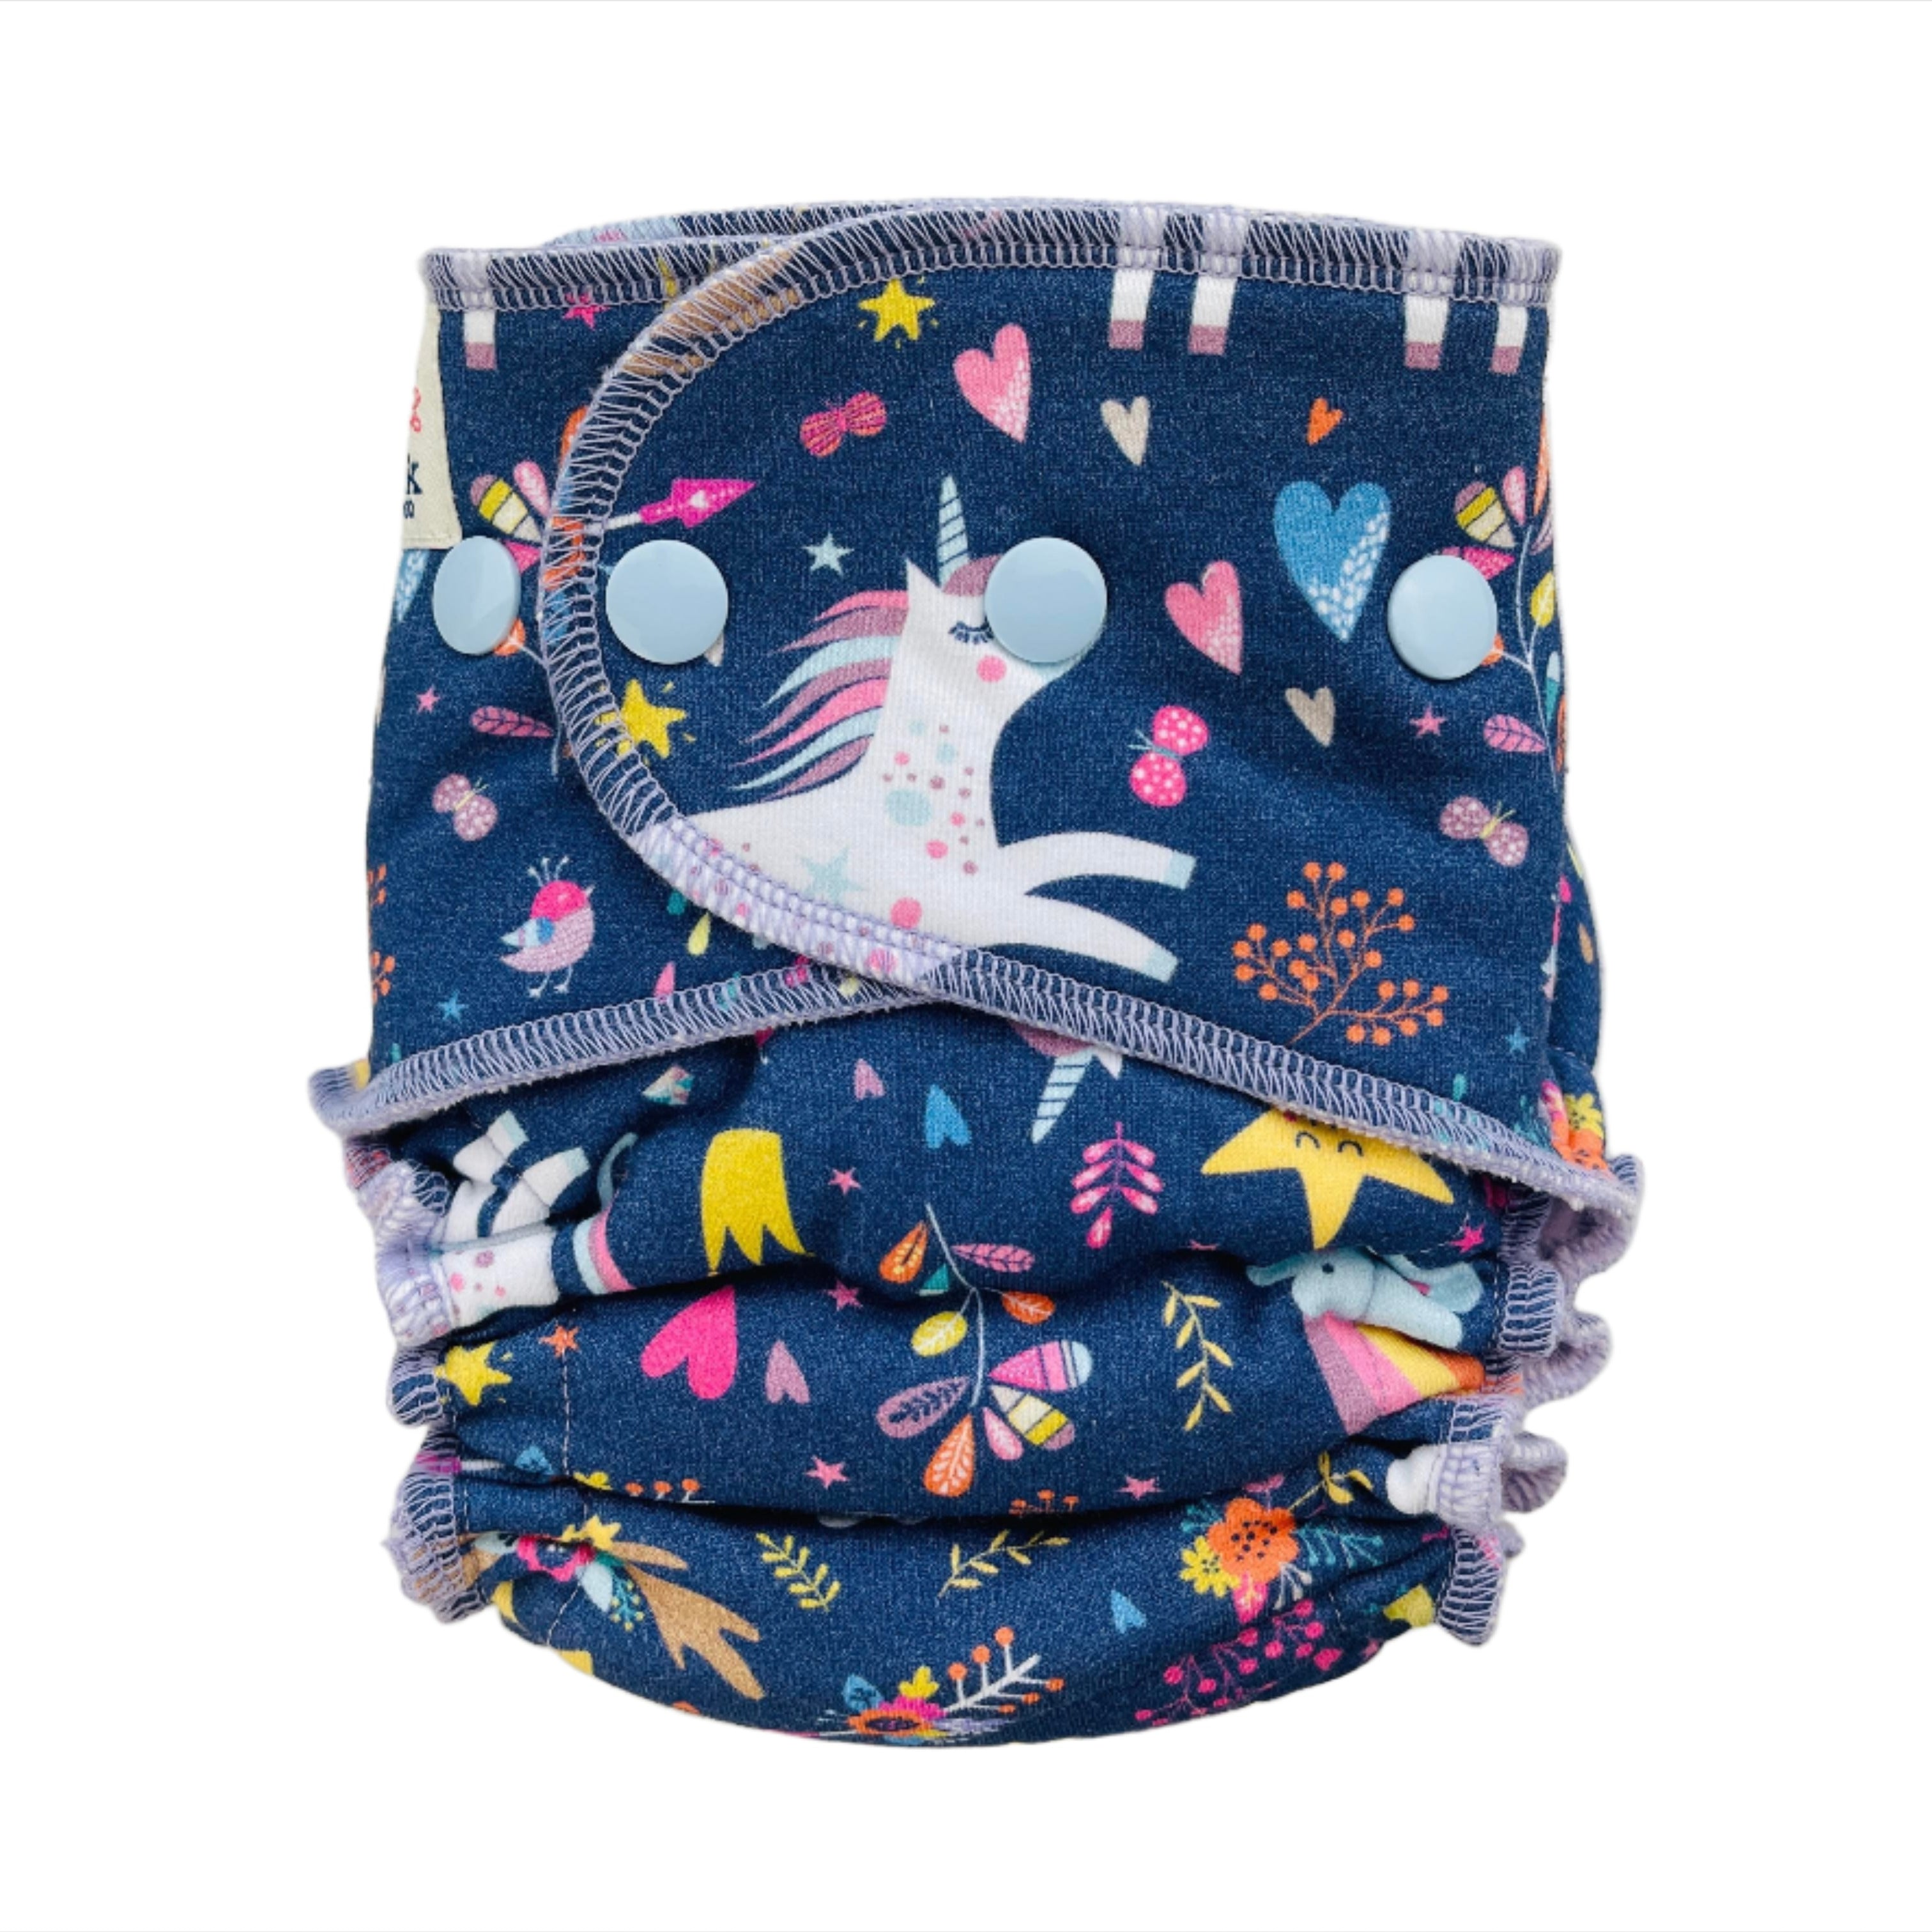 Lilly & Frank Petite Cloth Diaper Lovely Luna Petite Cloth Diaper - Fitted - Classic Serged